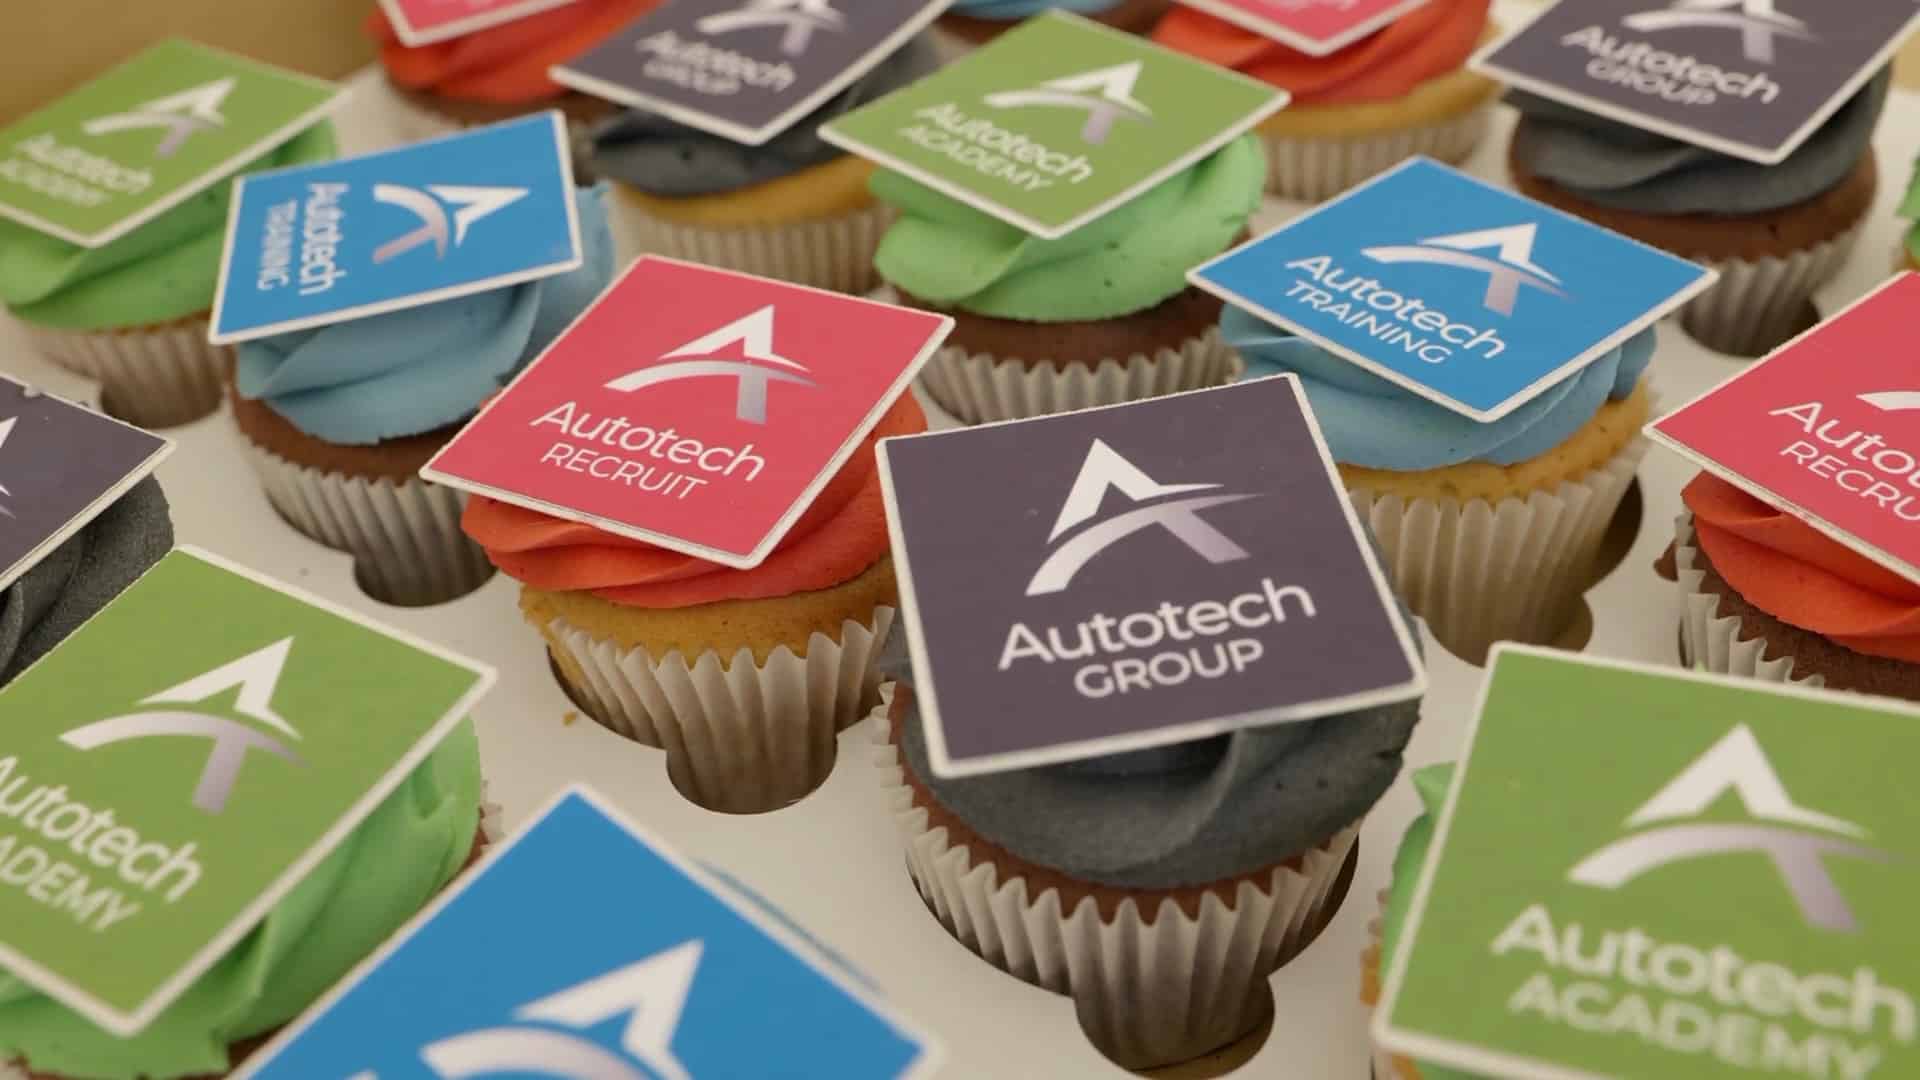 Image of Autotech Group branded cupcakes given out at our Family Fun Day